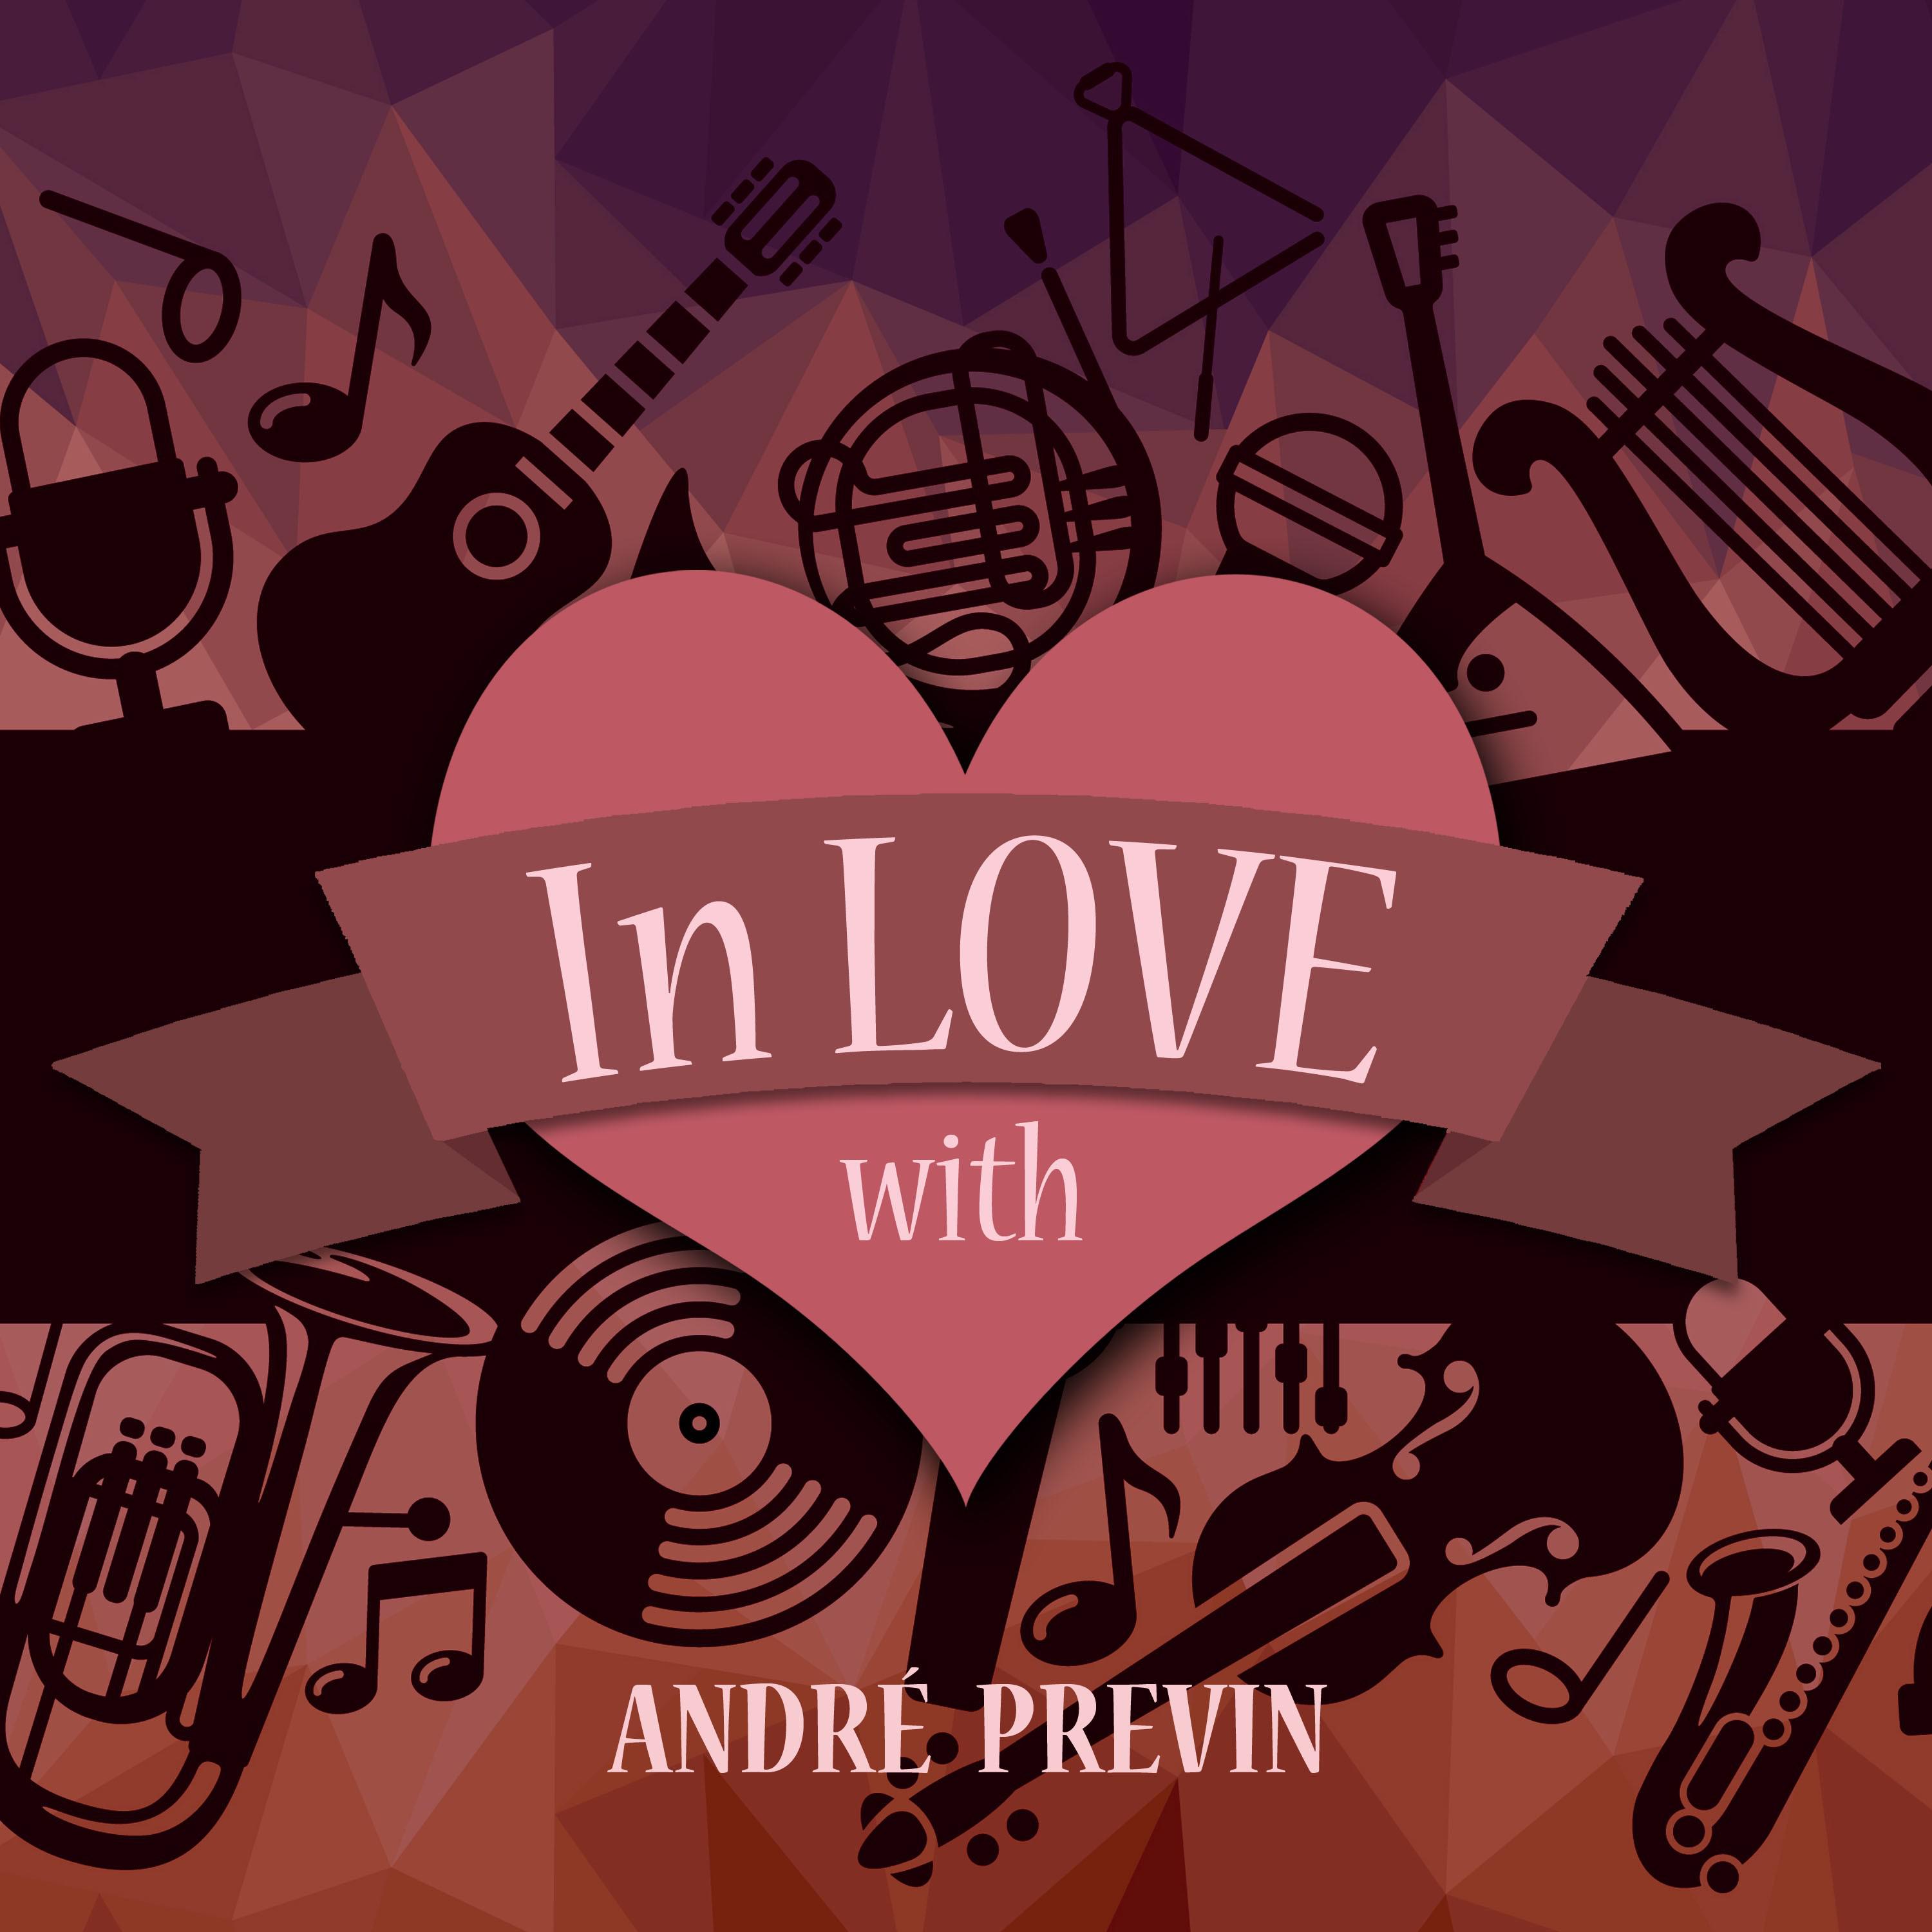 In Love with Andre Previn